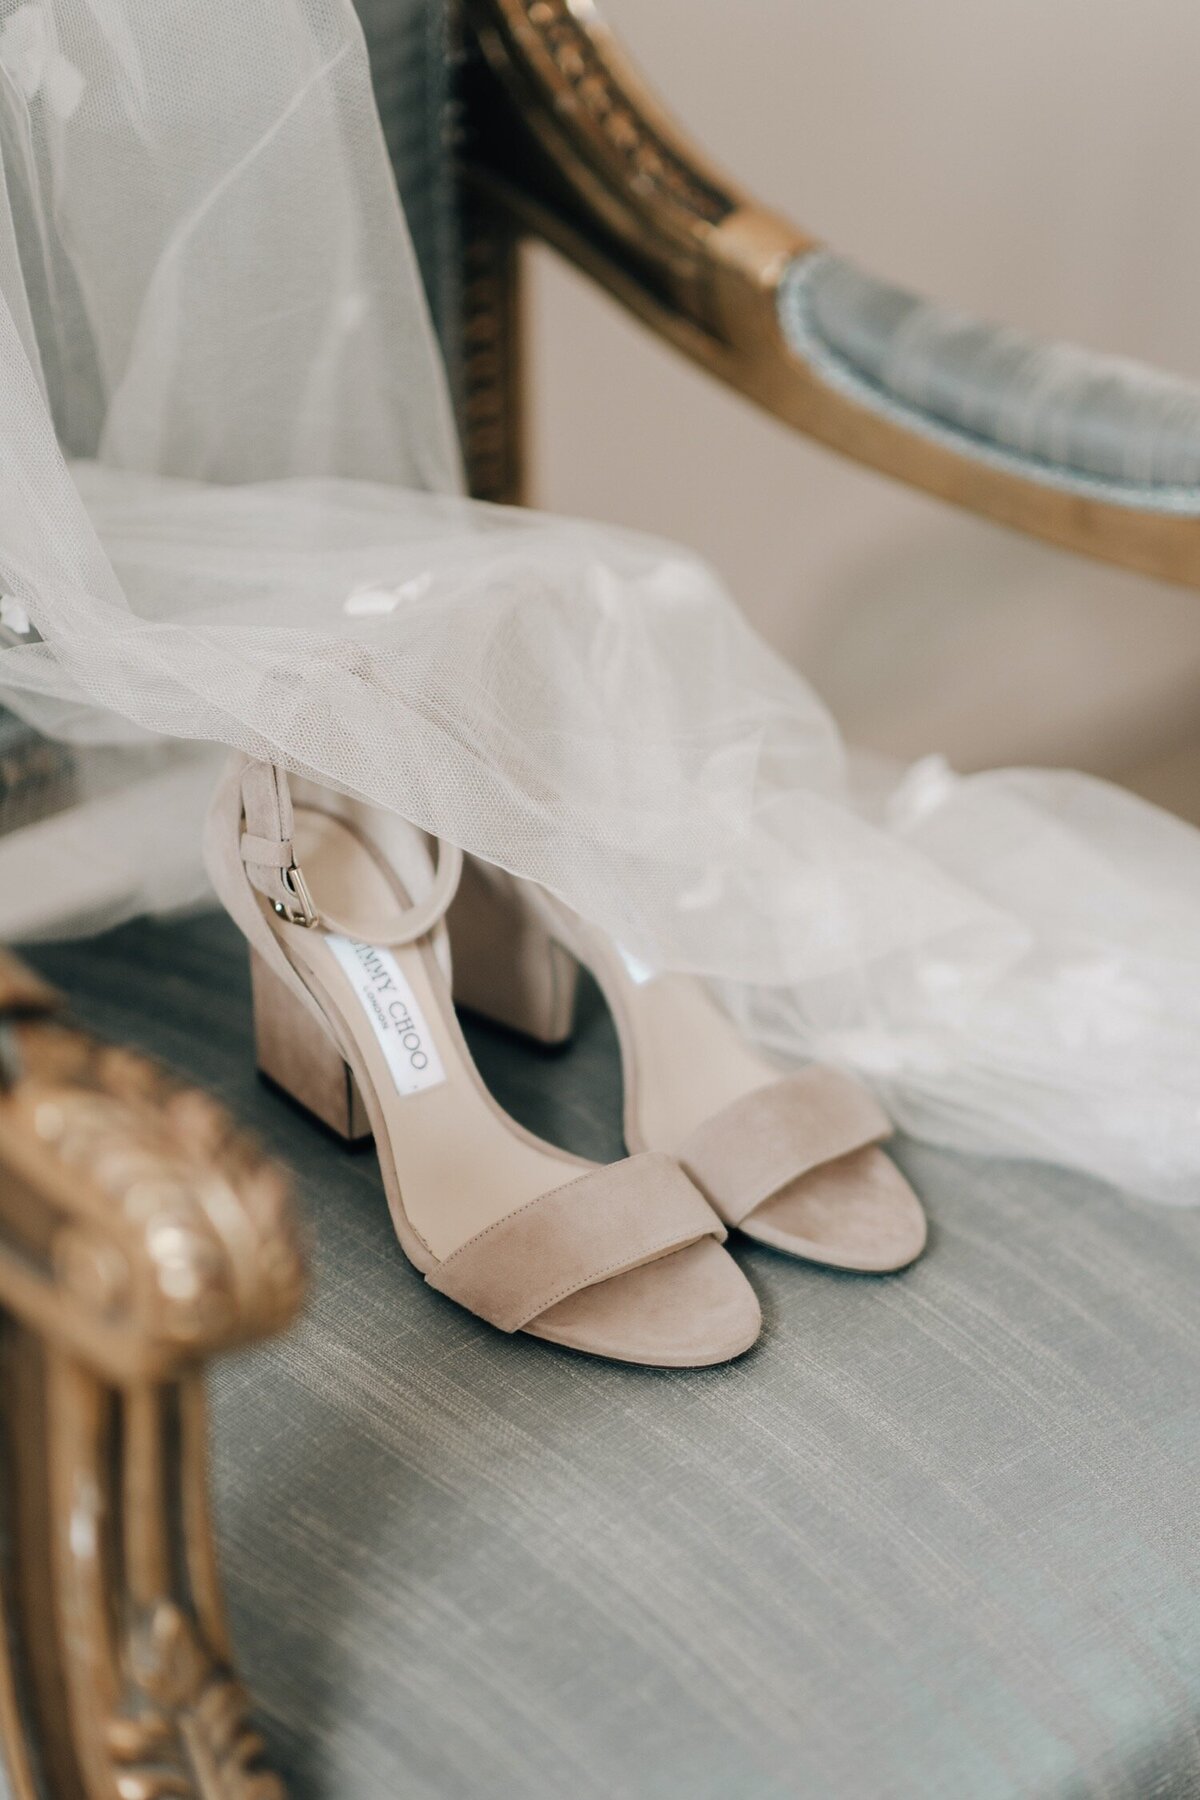 005_Flora_And_Grace_Europe_Destination_Wedding_Photographer-507_Elegant and whimsical destination wedding in Europe captured by editorial wedding photographer Flora and Grace.